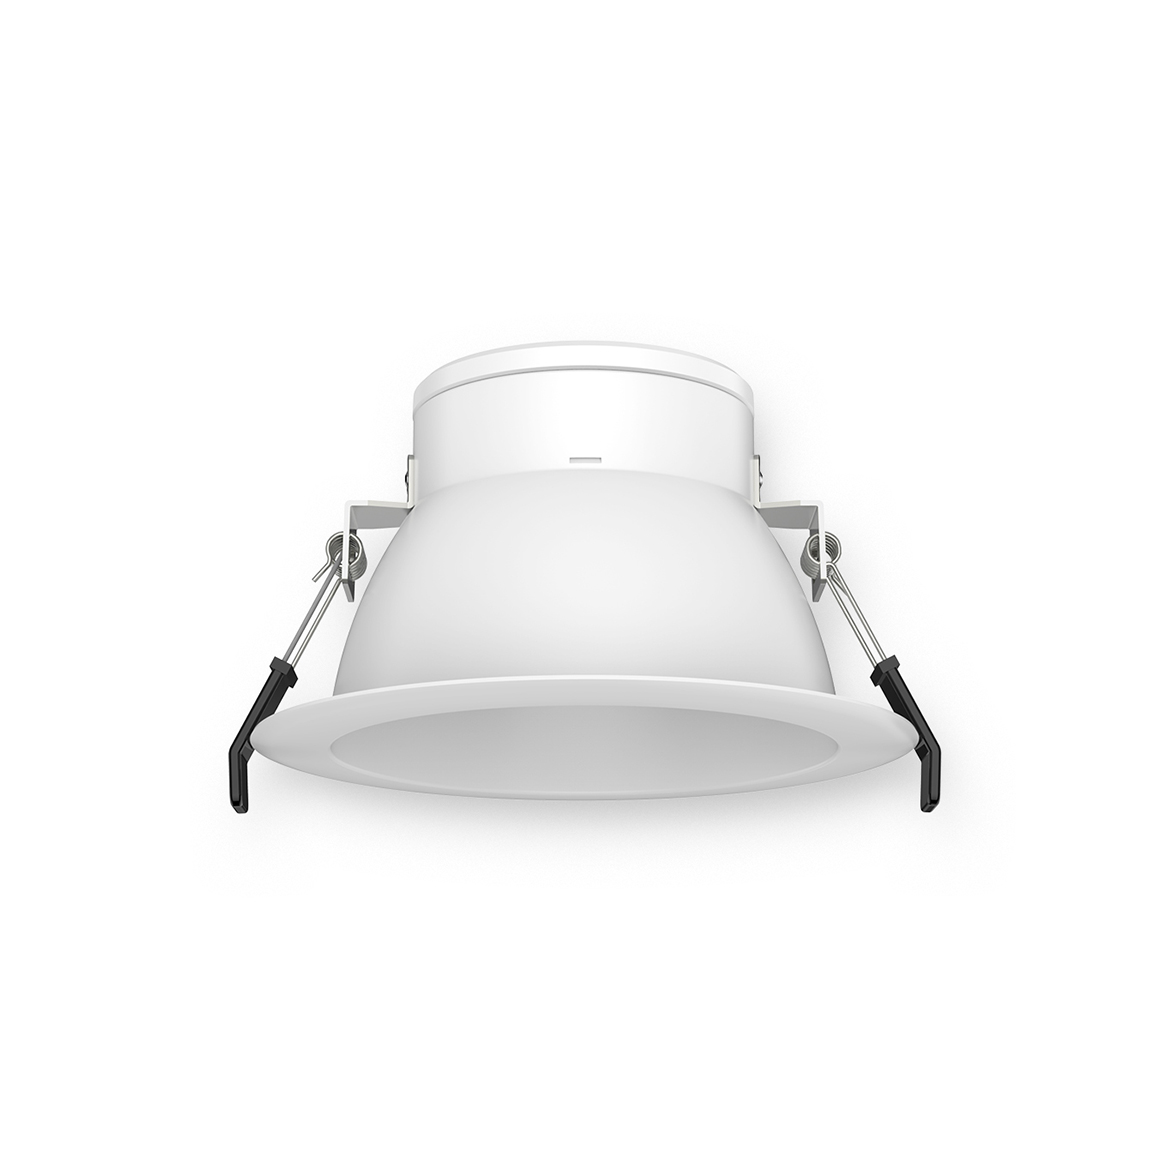 DownLight DS1 2600lm